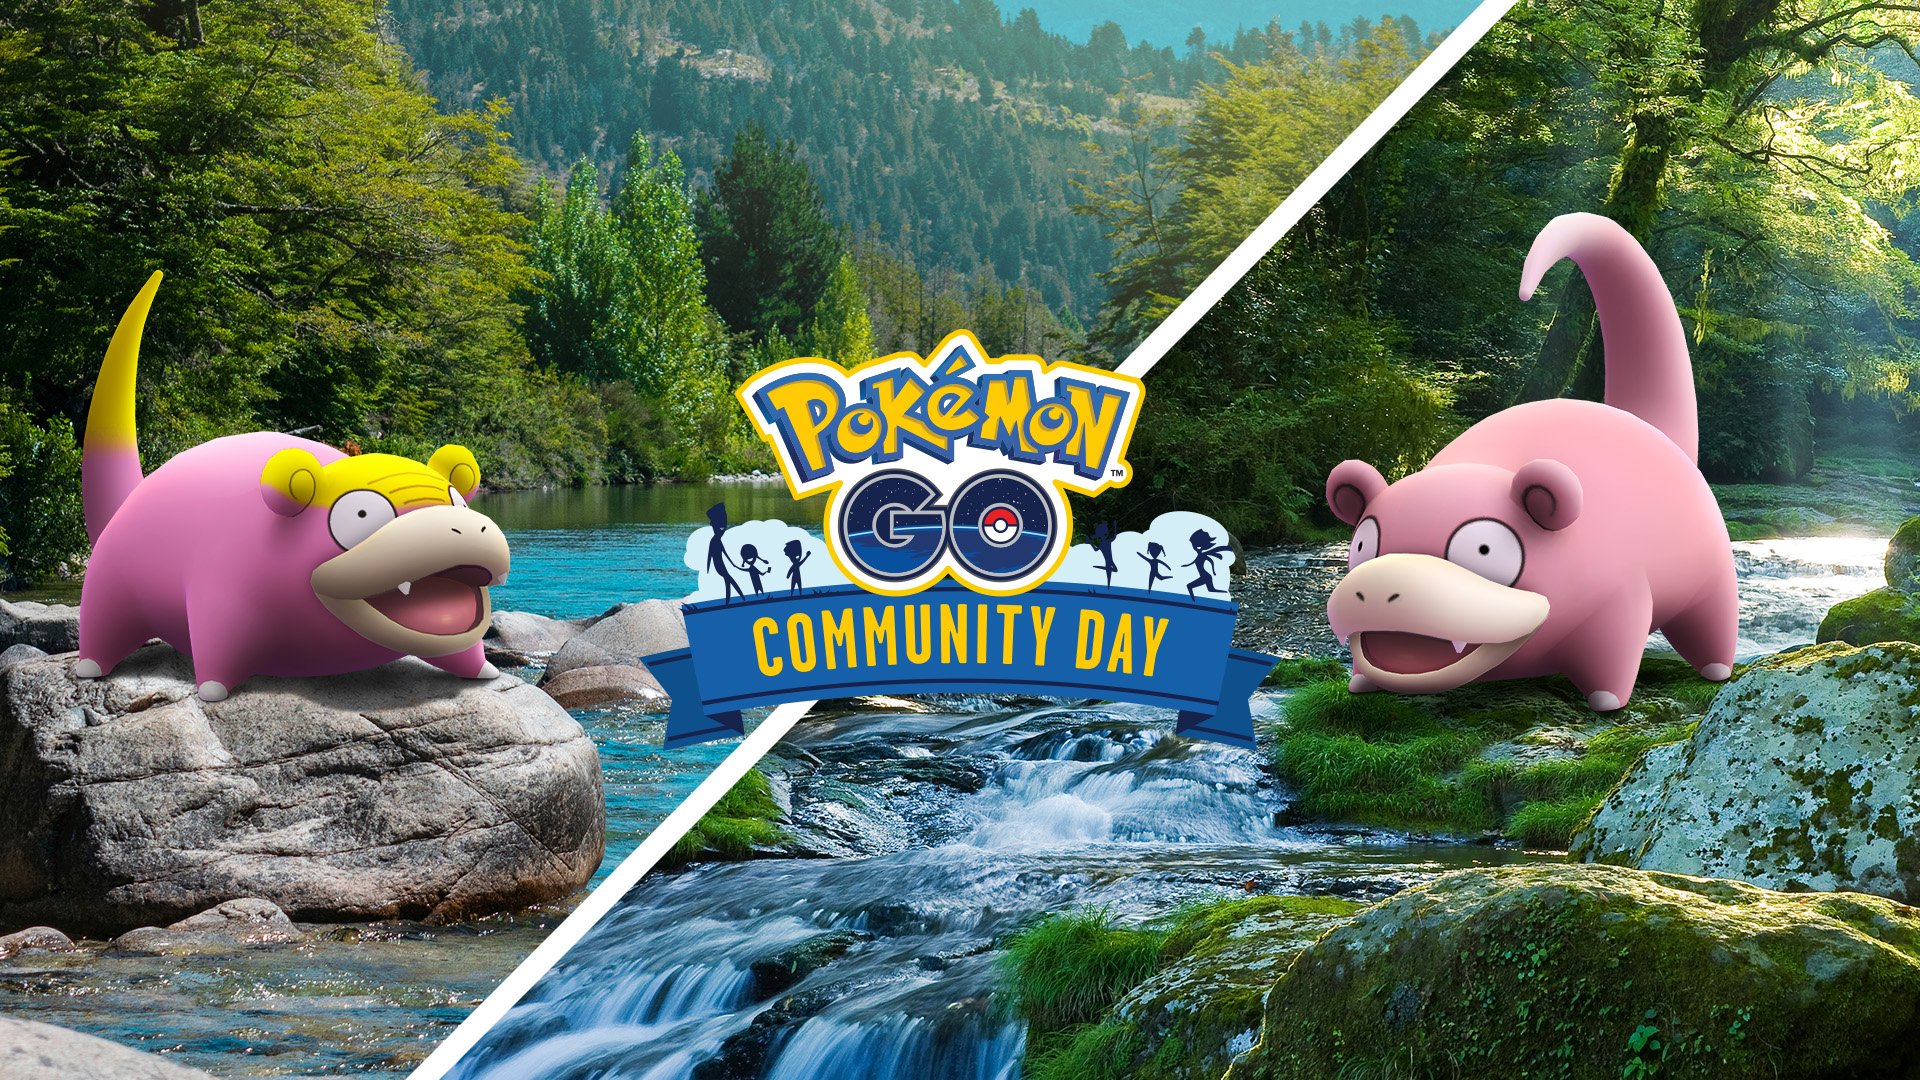 Serebii.net on X: "Serebii Update: The Pokémon GO Slowpoke & Galarian  Slowpoke Community Day event is starting to roll out in Europe &  Africa. Runs from 14:00 local time to 17:00 local